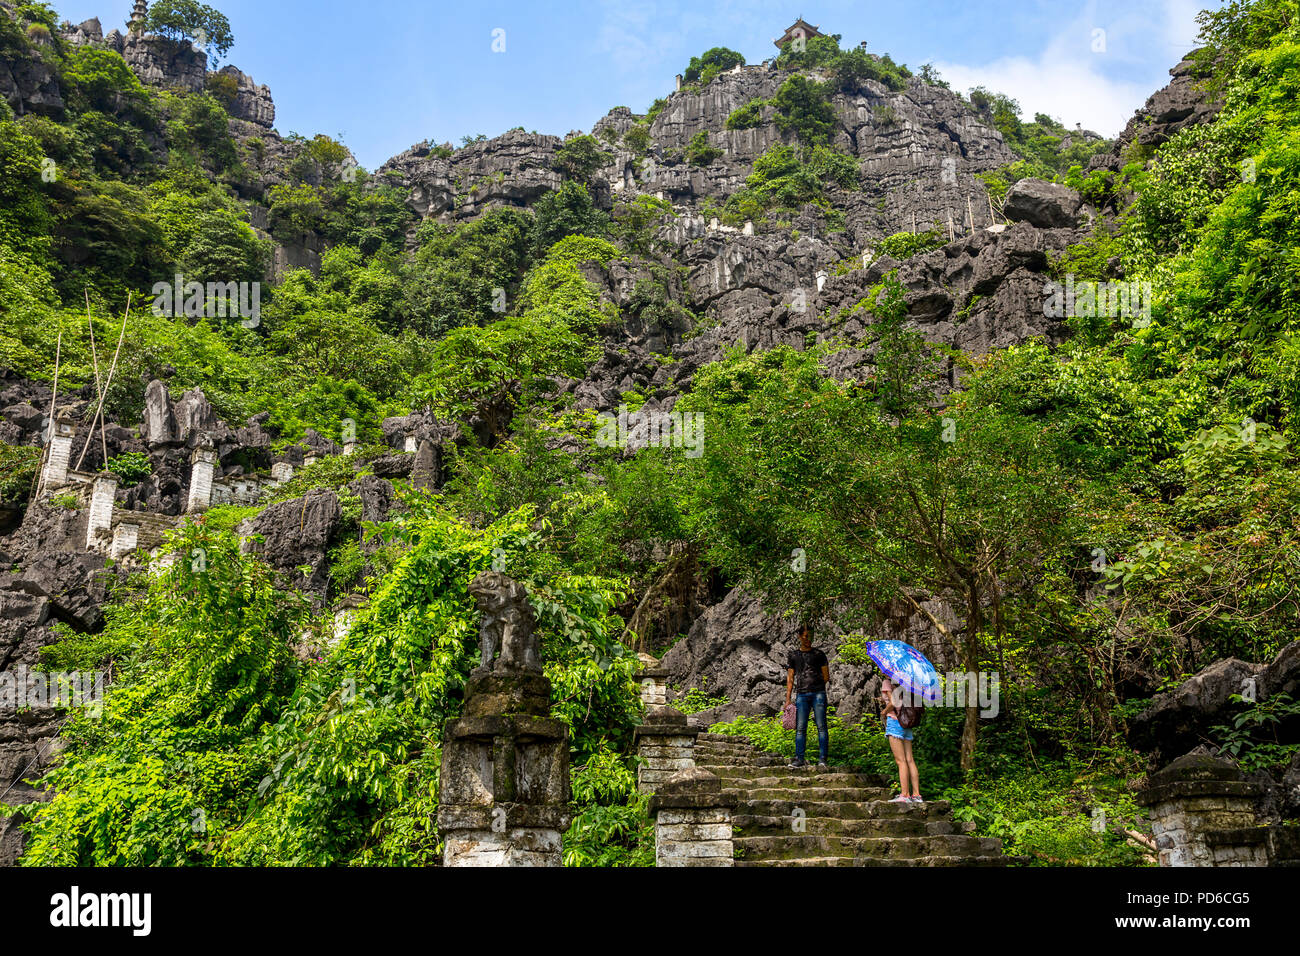 A man and woman with an umbrella on the stone stairway up from Mau Cave, Tam coc, Vietnam Stock Photo